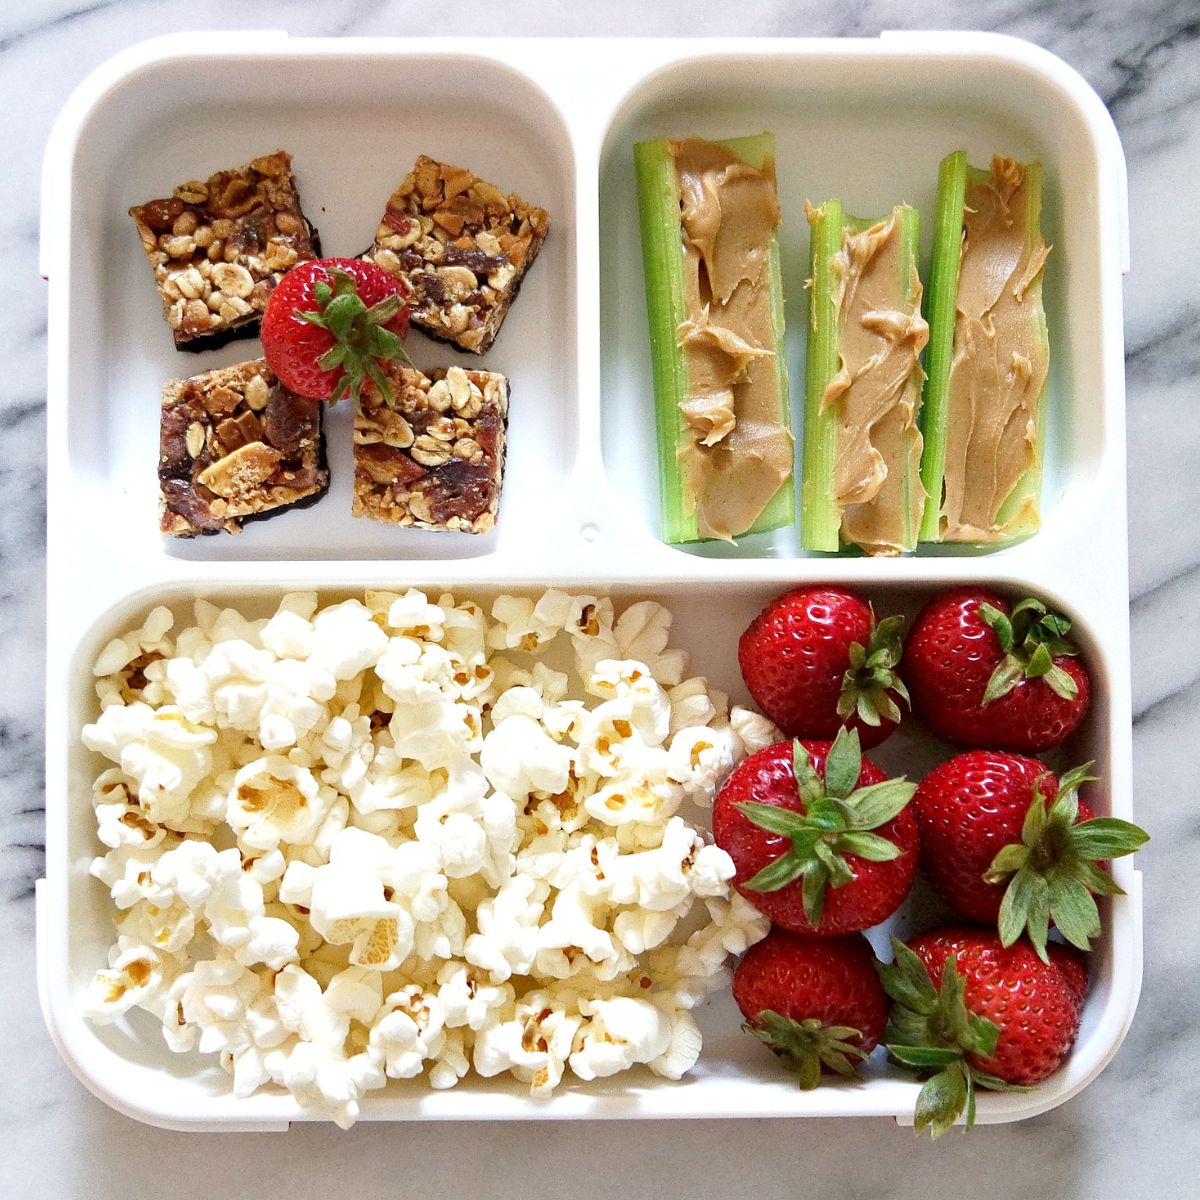 Bento School Lunches : How To Pack Hot Leftovers For Lunch & 30